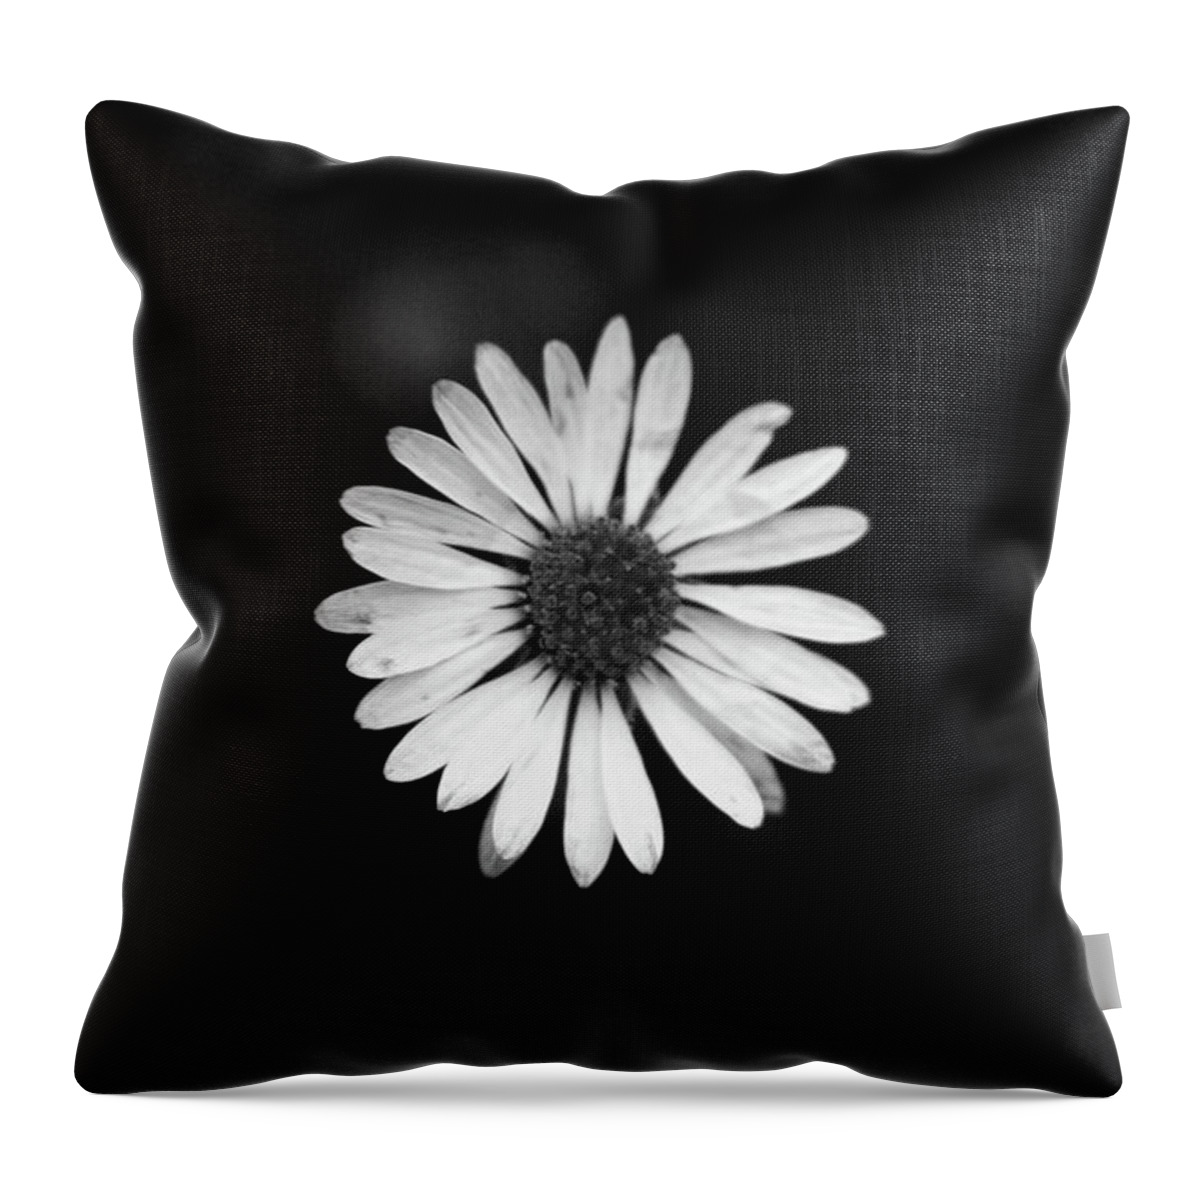 Bellis Perennis Throw Pillow featuring the photograph Black and white bloom of bellis perennis by Vaclav Sonnek